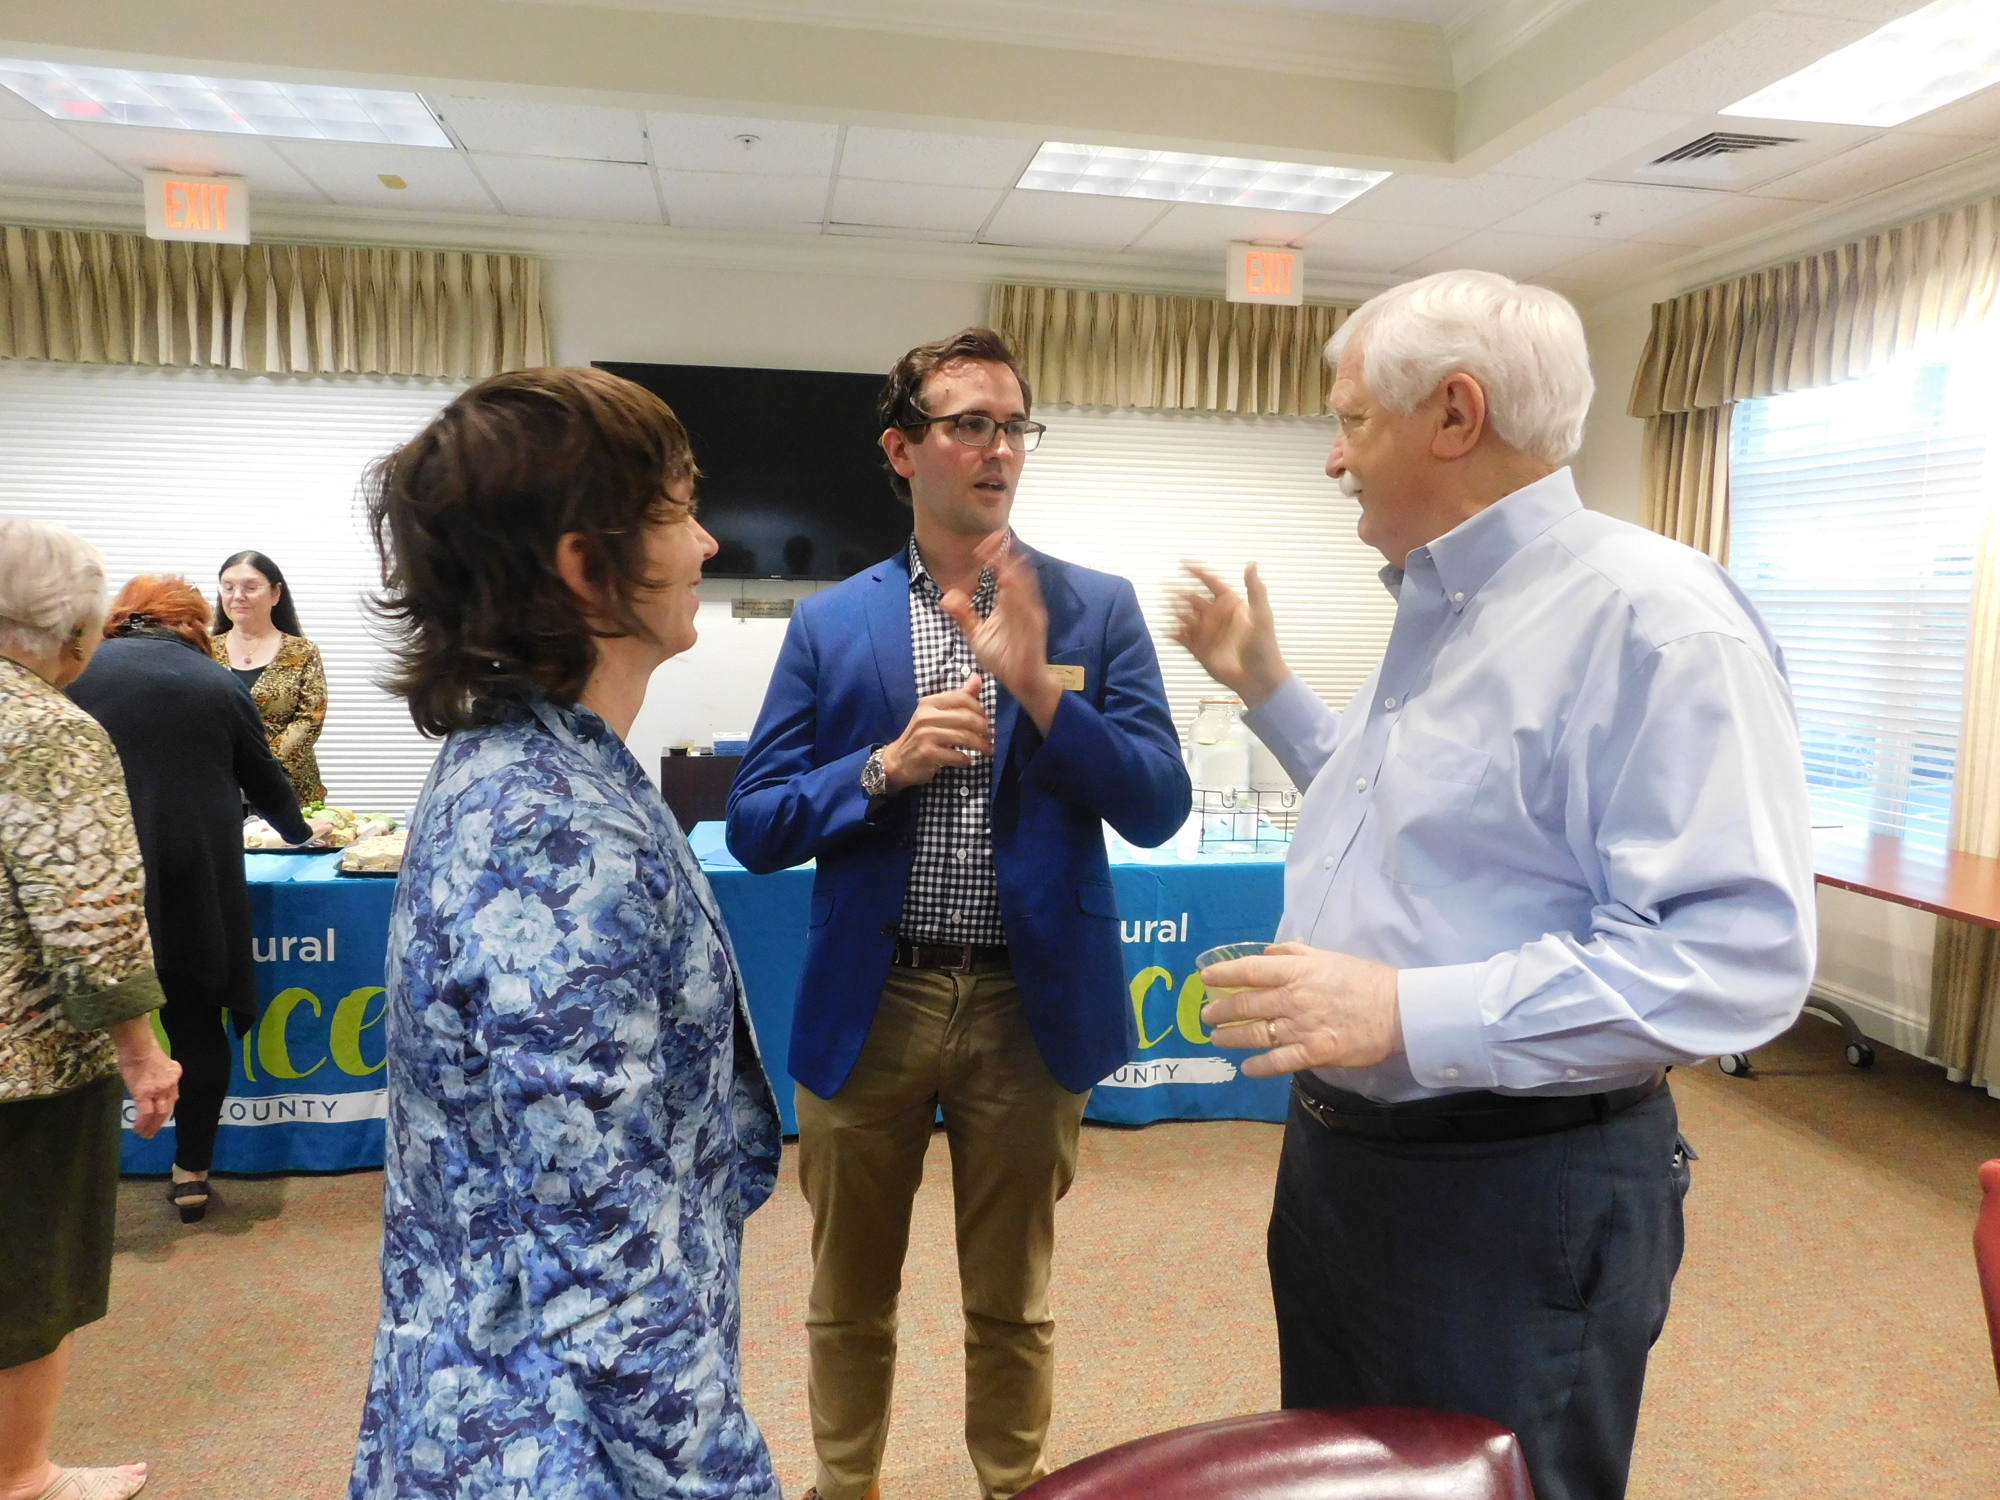 Andy Sandberg chats with Arts & Cultural Alliance of Sarasota Jim Shirley and flautist Claire Chase prior to a public introduction event  at the alliance's offices.